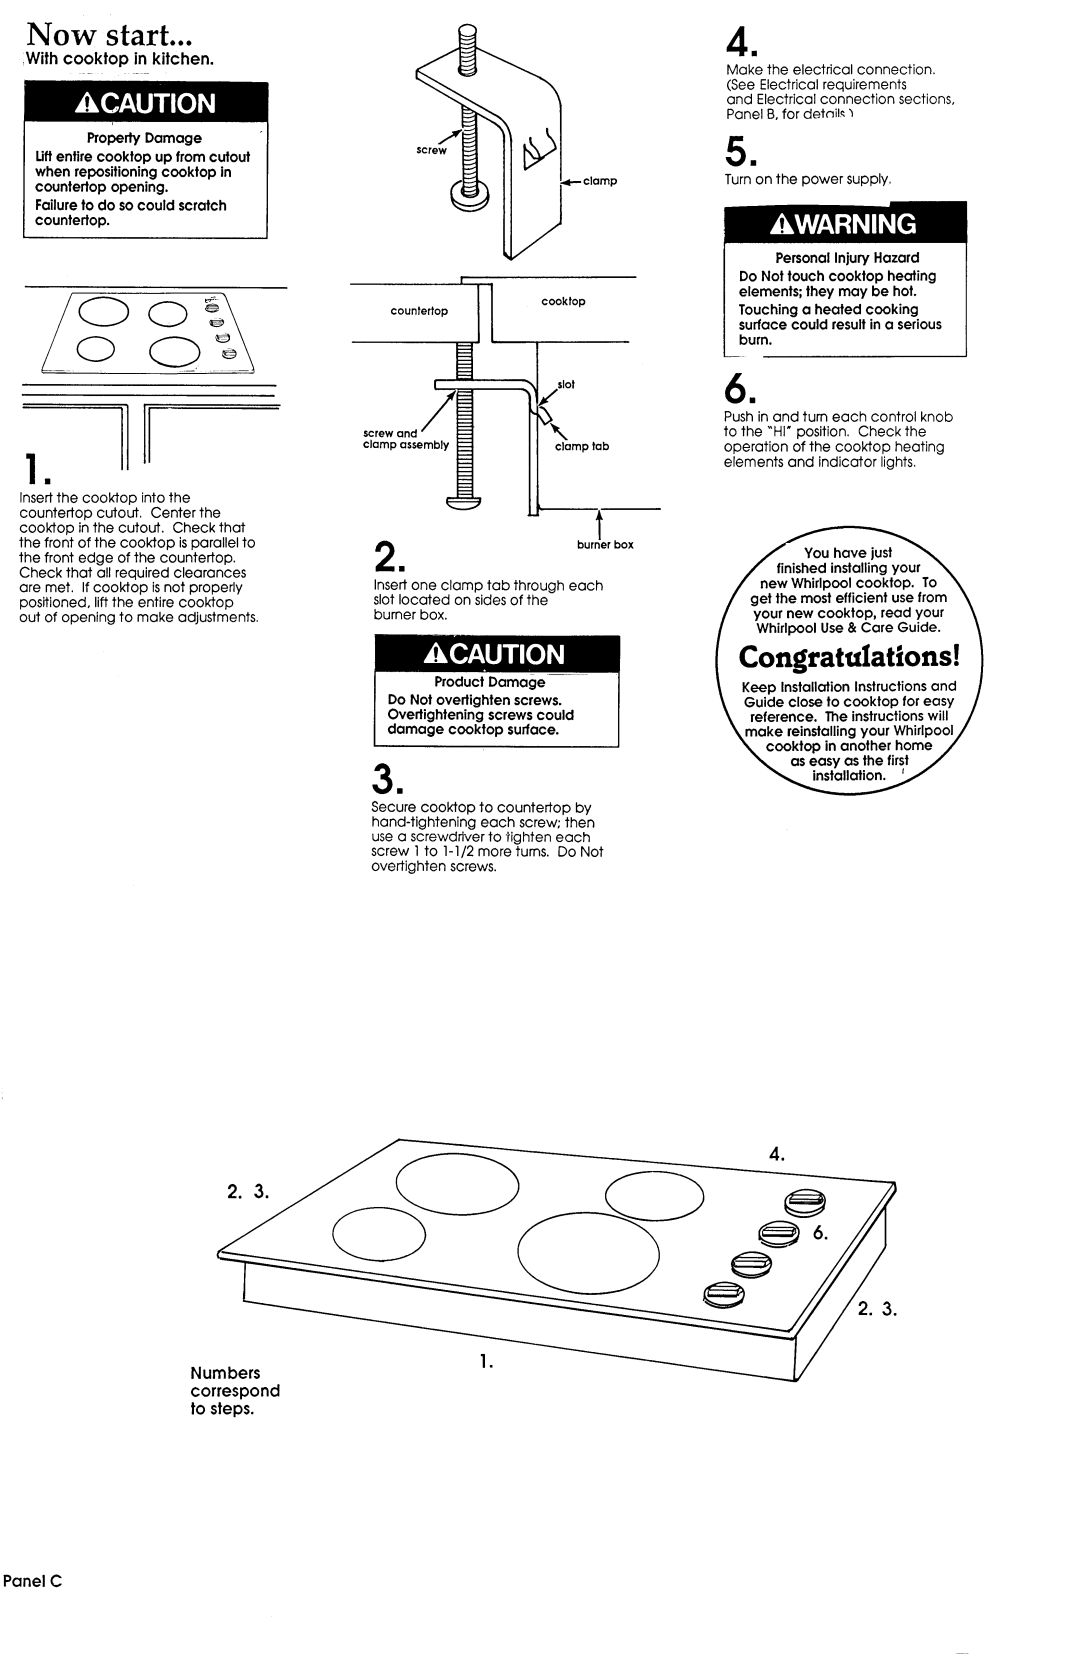 Whirlpool Cooktop Now start, Congratulations, With cooktop in kitchen. ~, Panel C, Numbers correspond to steps, 1....1 